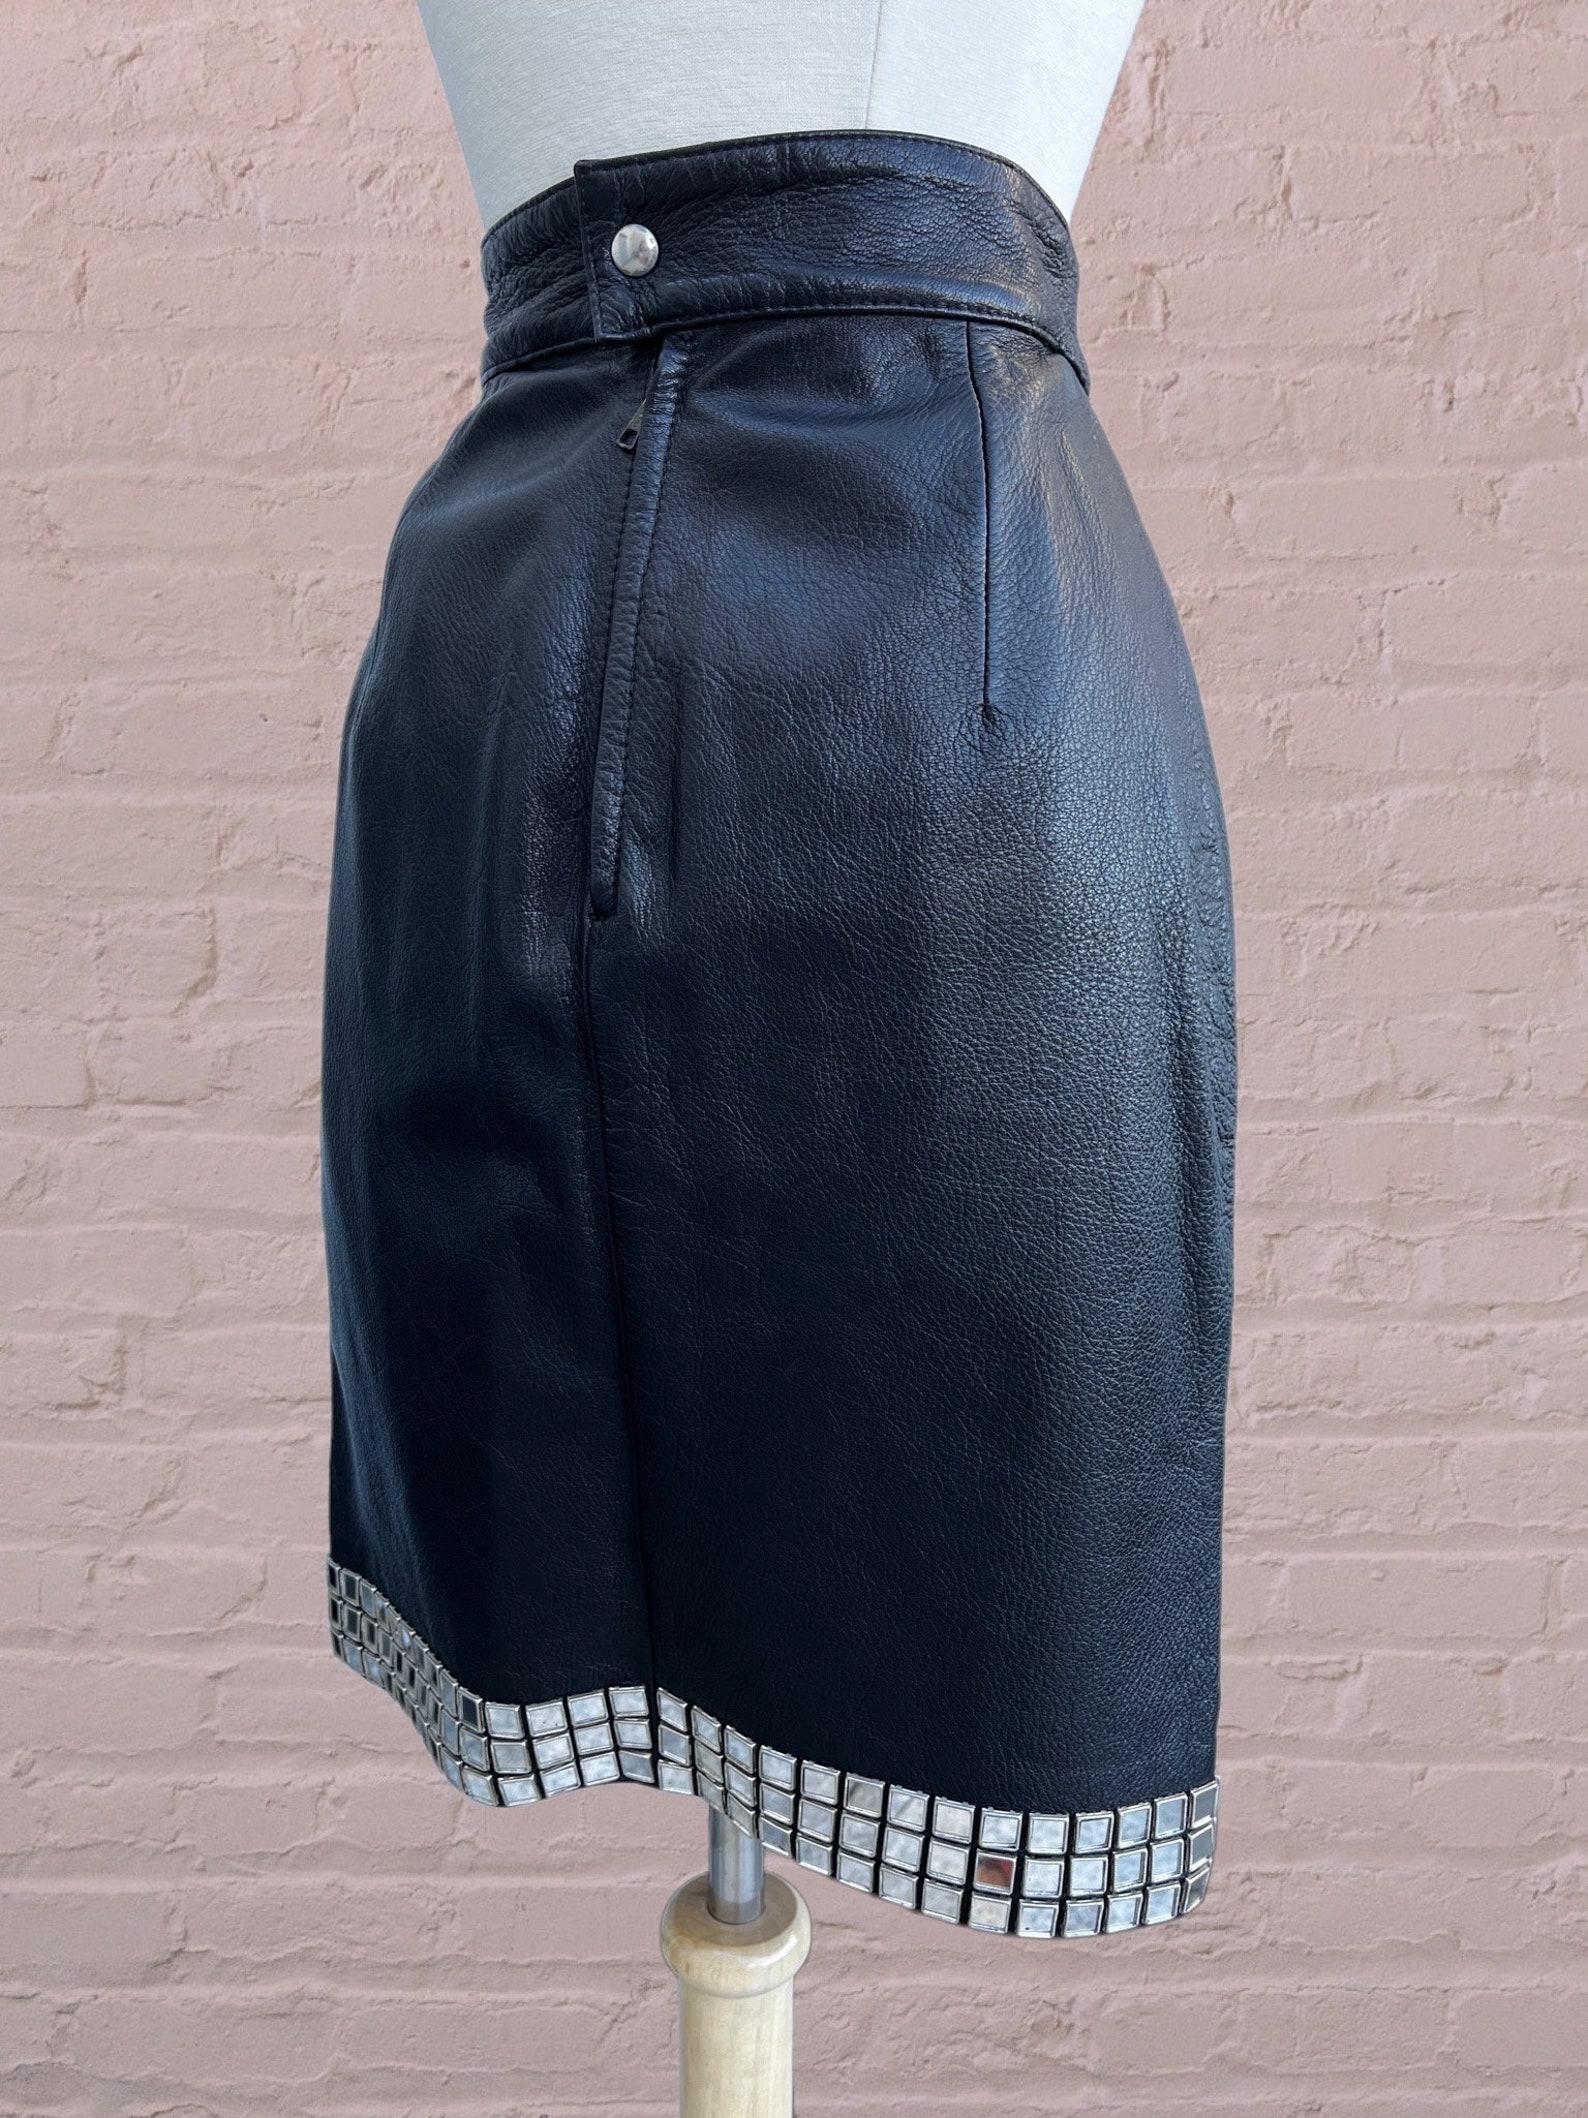 Moschino black leather mirror skirt For Sale 2